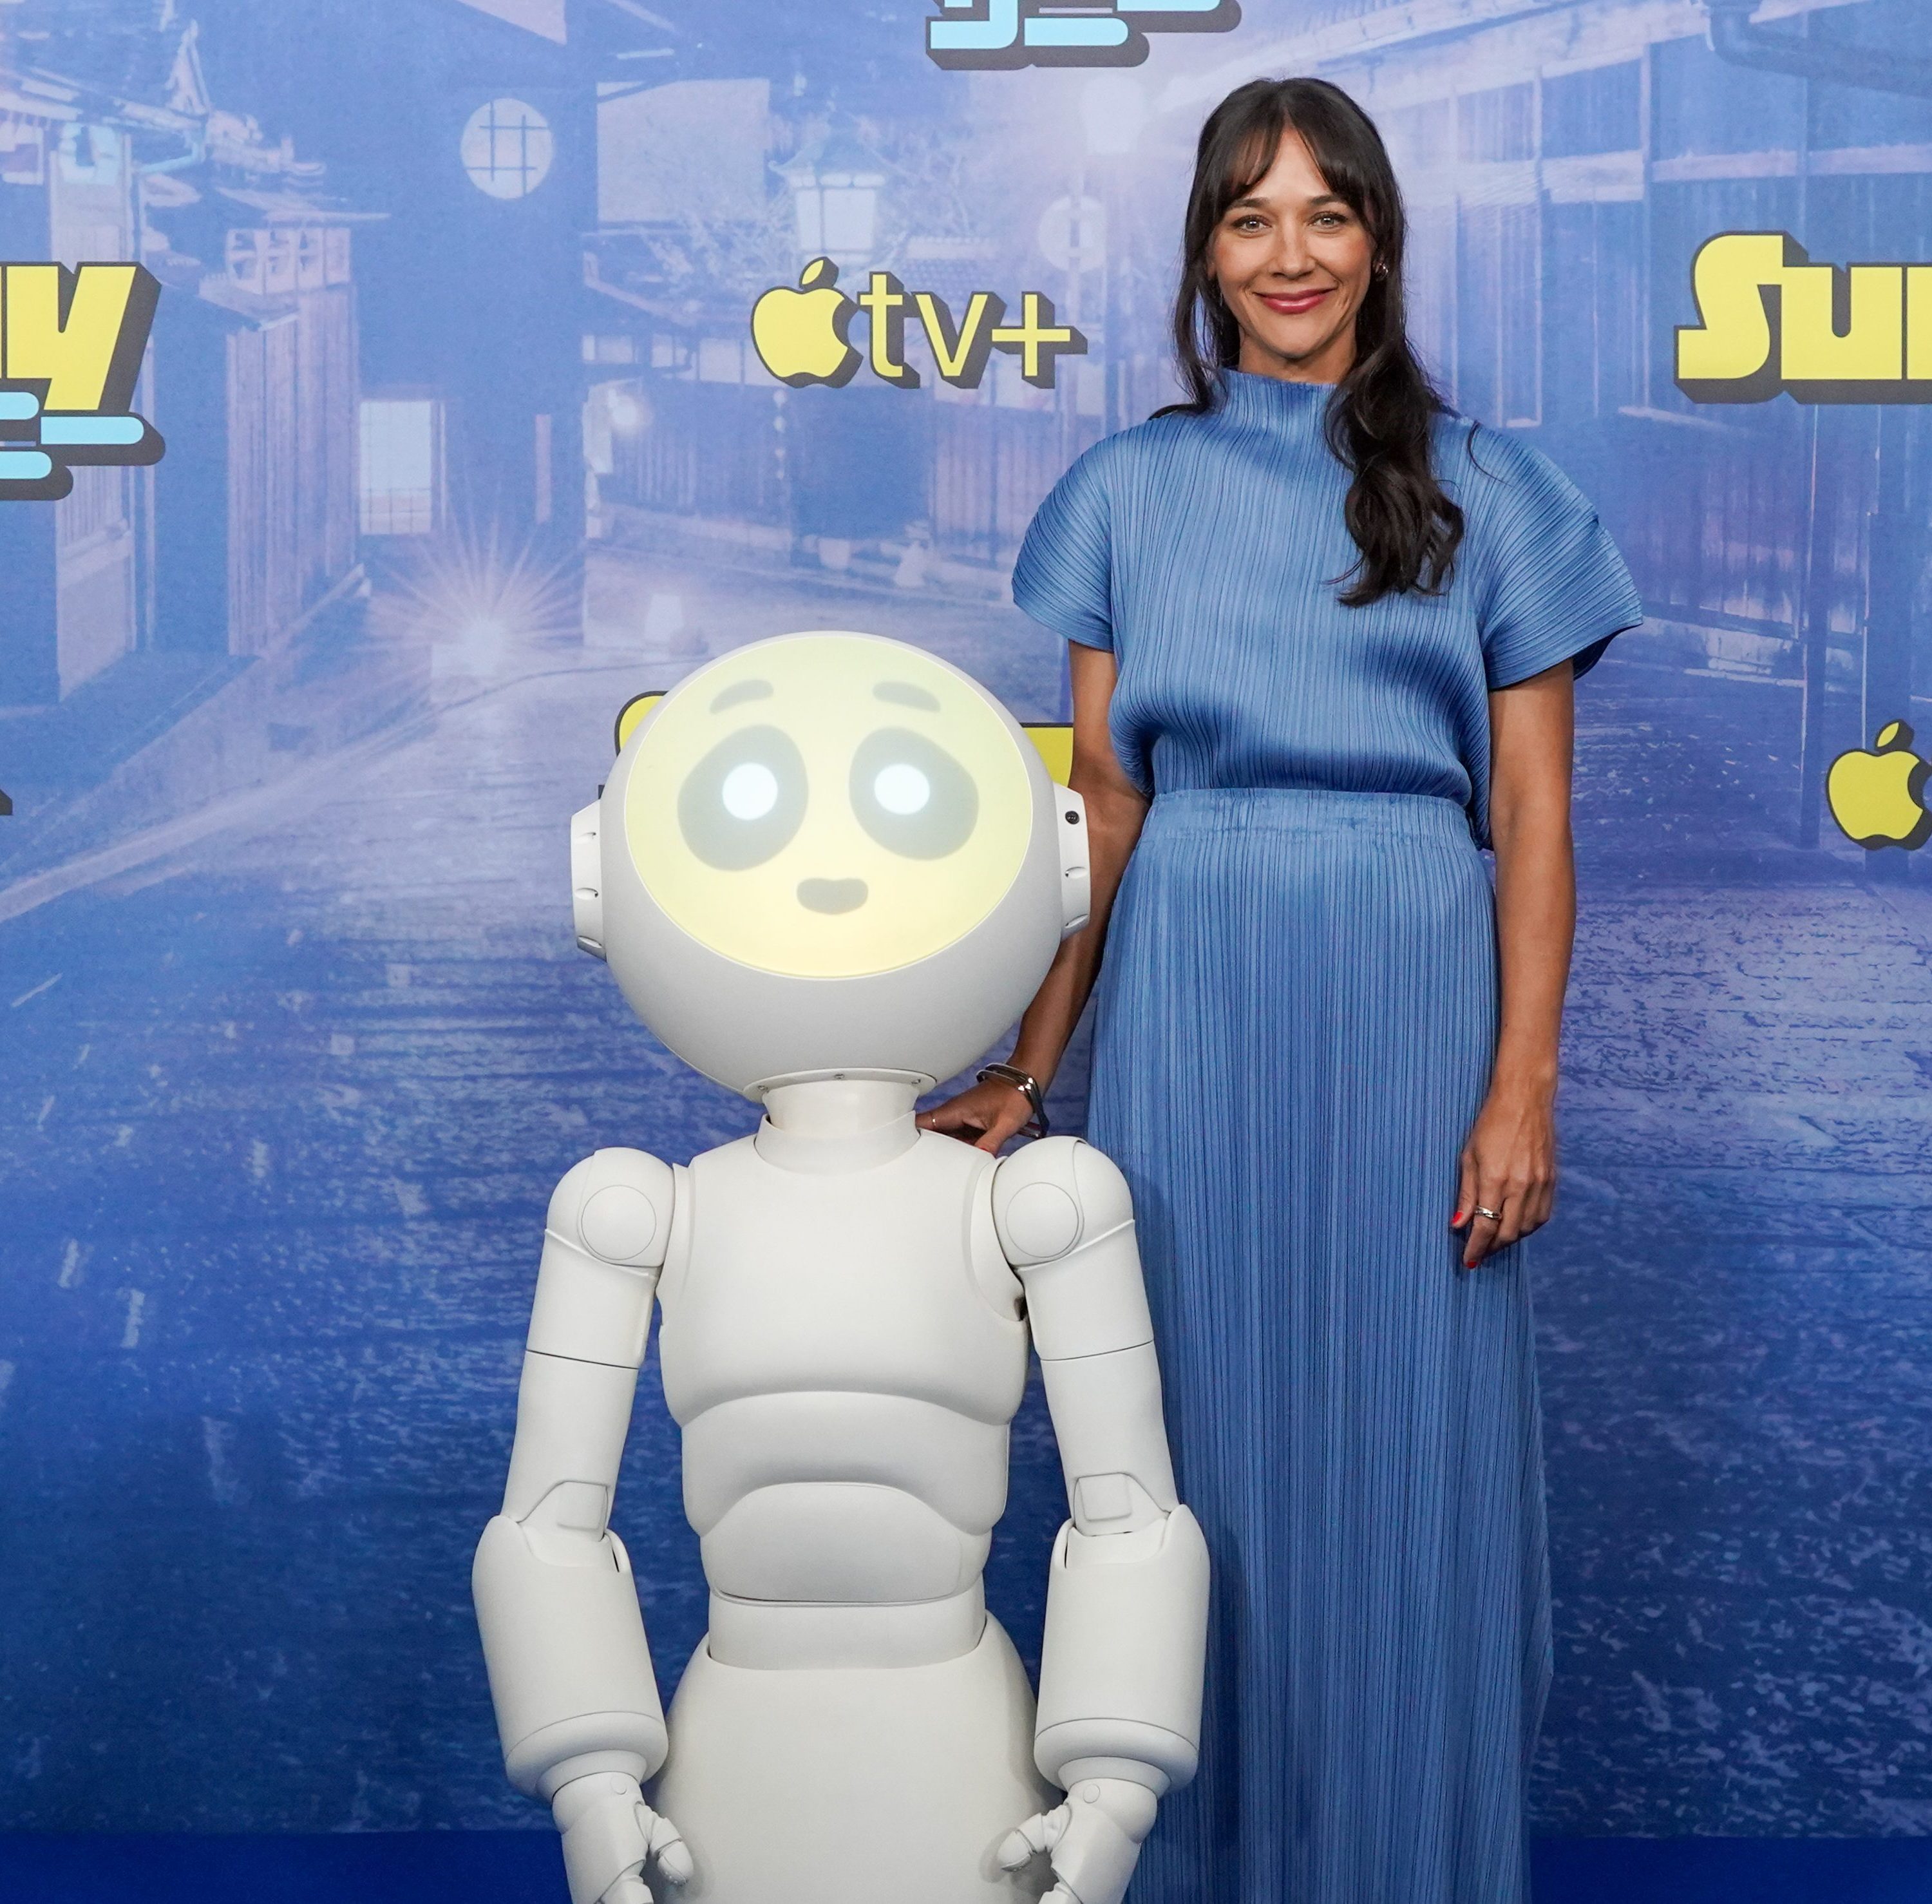 TOKYO, JAPAN - JUNE 25: Rashida Jone attends the photocall for "SUNNY" at Four Seasons Hotel Tokyo at Otemachi on June 25, 2024 in Tokyo, Japan. “SUNNY" is available to stream globally on Apple TV+ on July 10, 2024. (Photo by Tomohiro Ohsumi/Getty Images for Apple TV+)